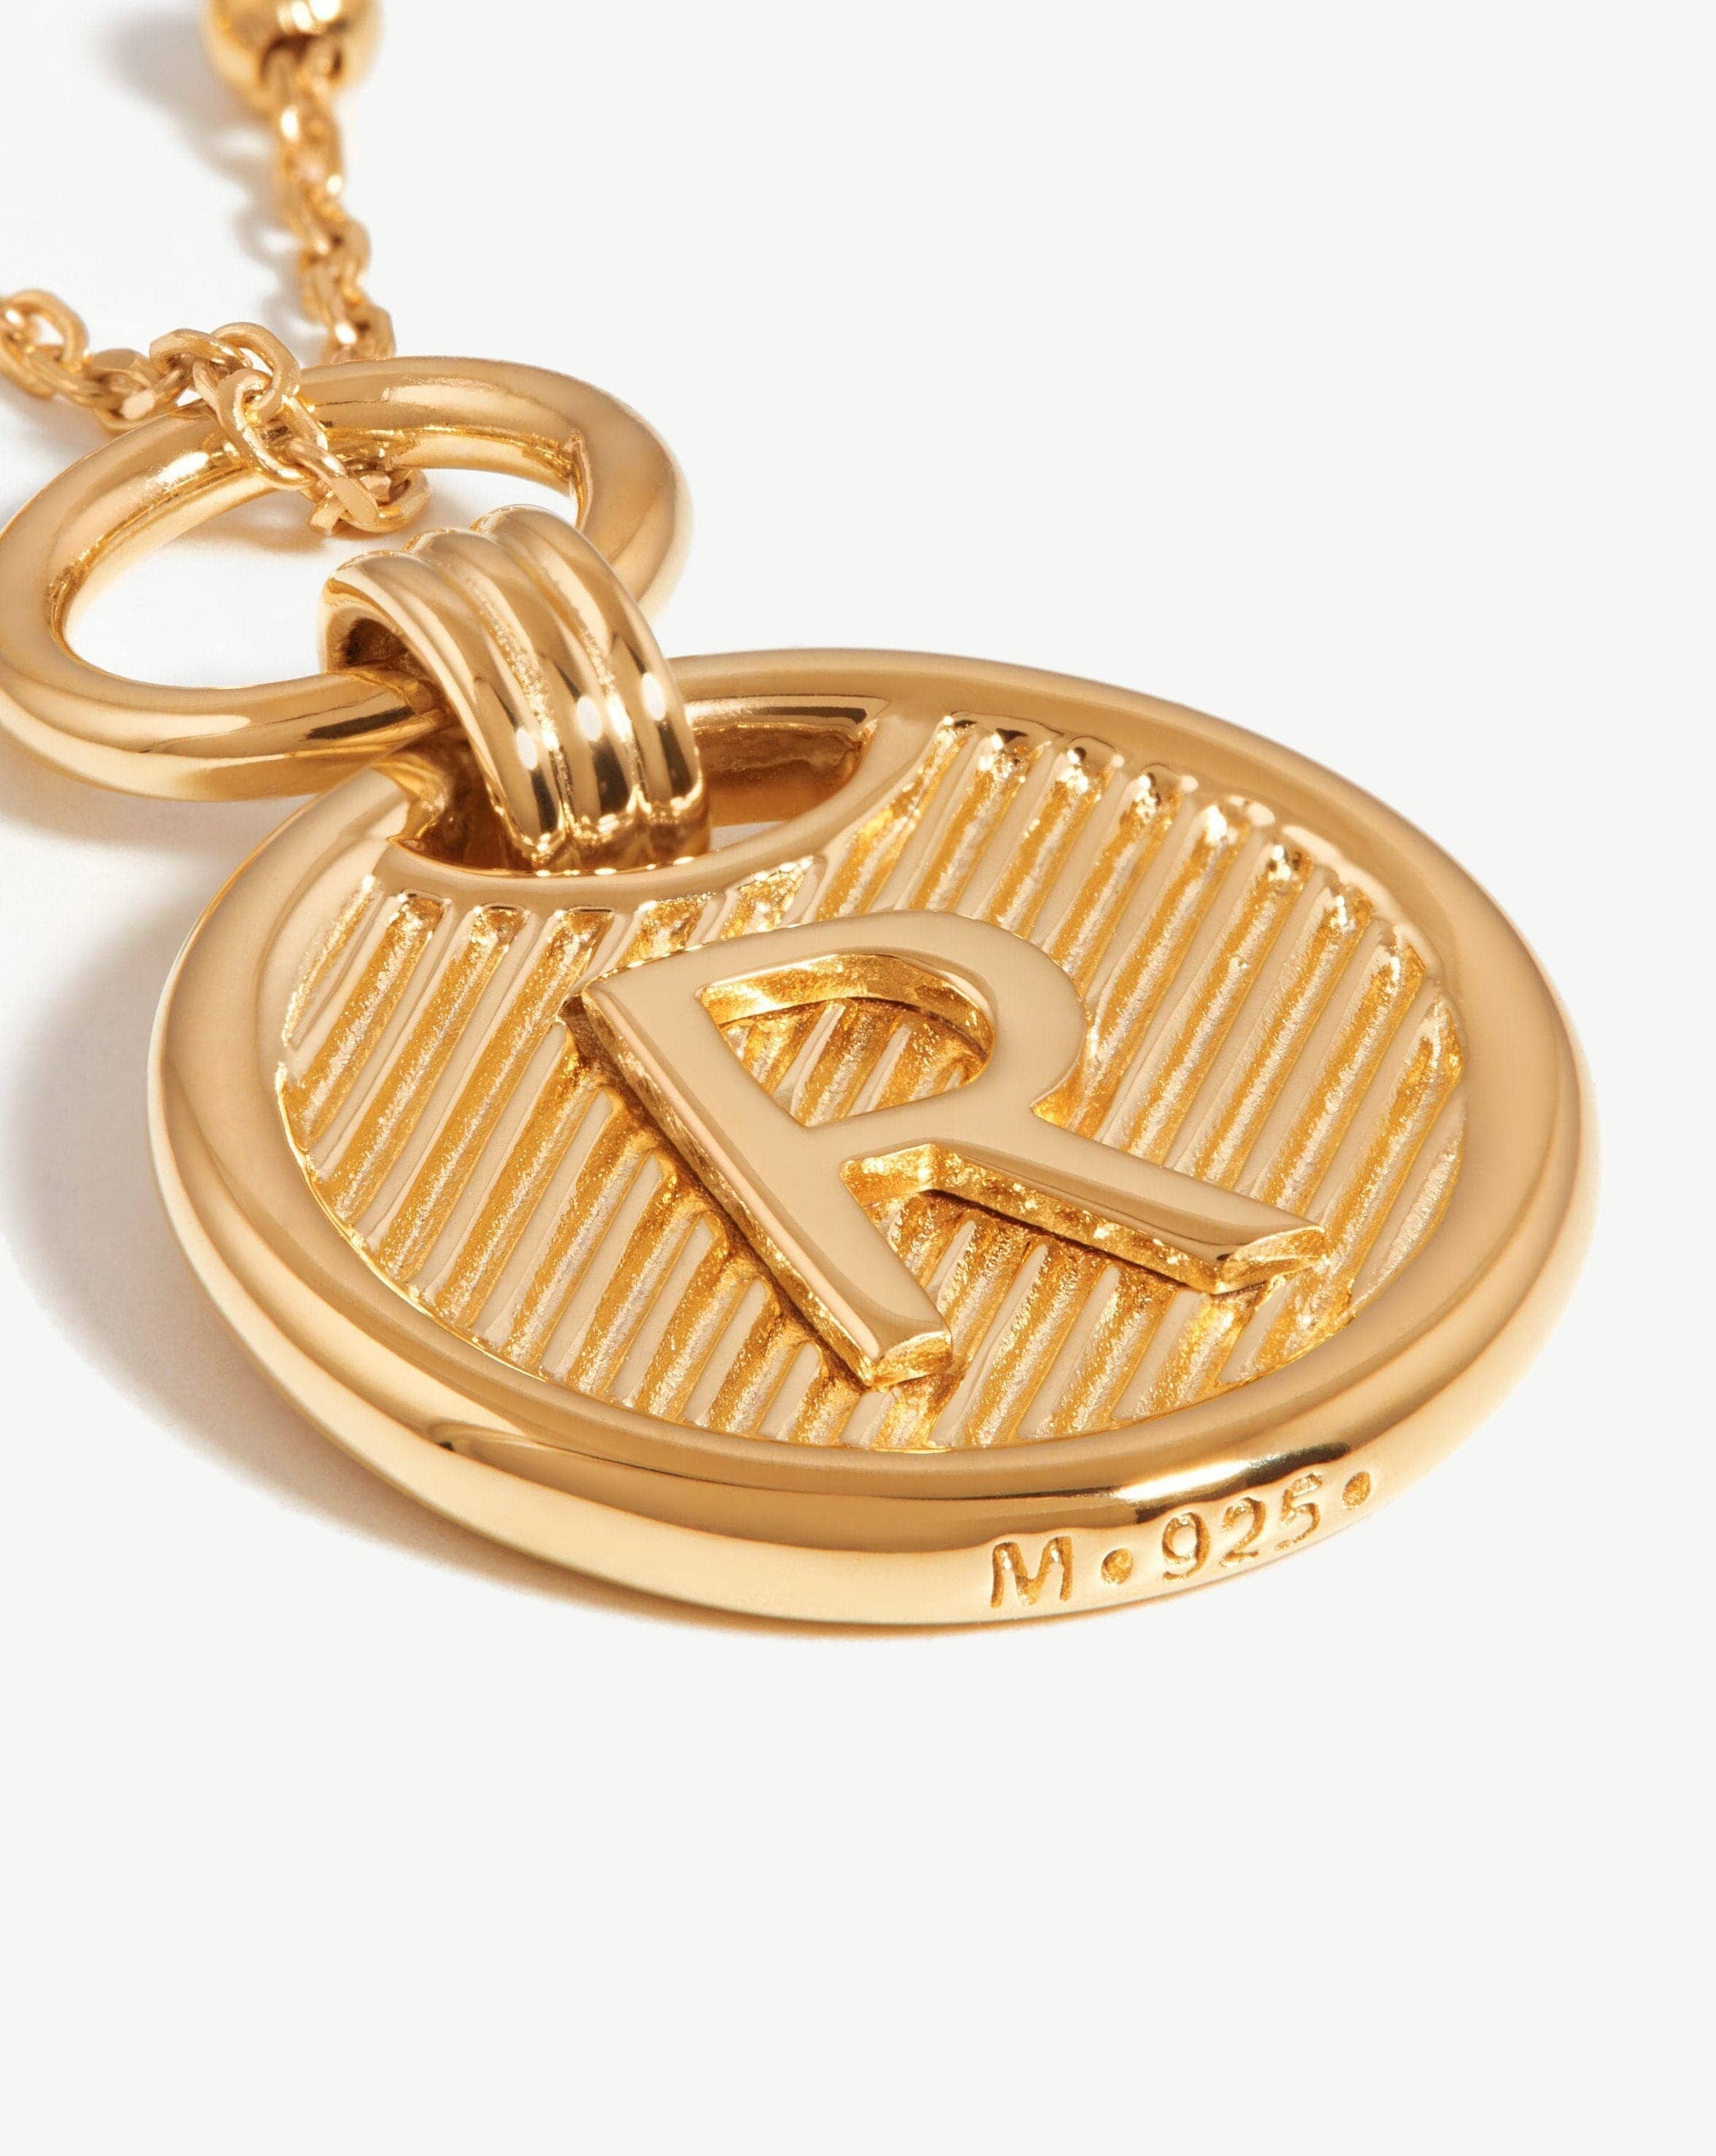 Initial Pendant Necklace - Initial R | 18ct Gold Plated Vermeil Necklaces Missoma 